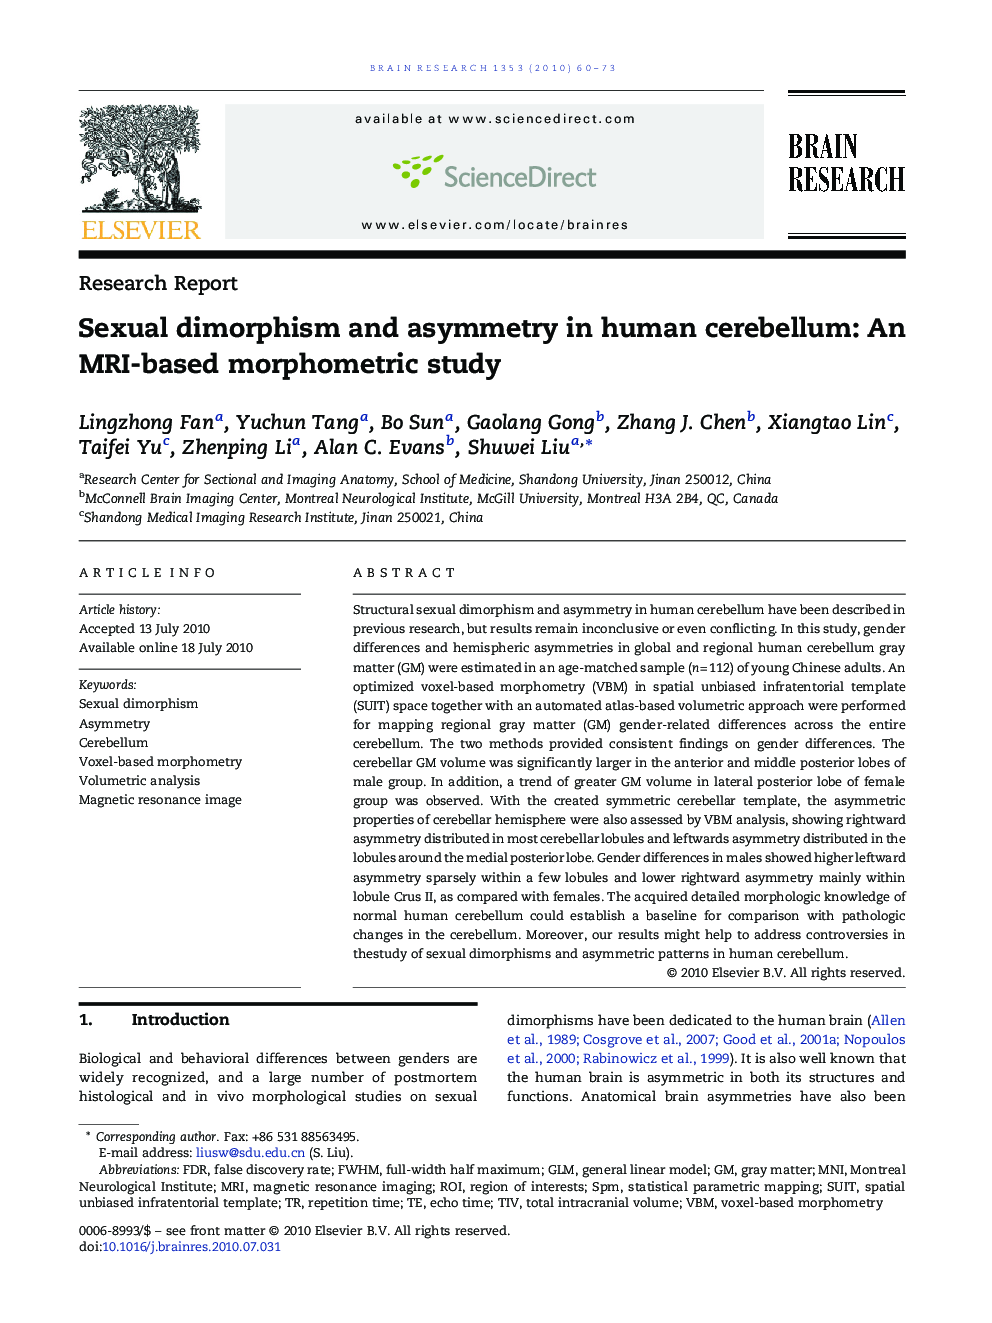 Sexual dimorphism and asymmetry in human cerebellum: An MRI-based morphometric study